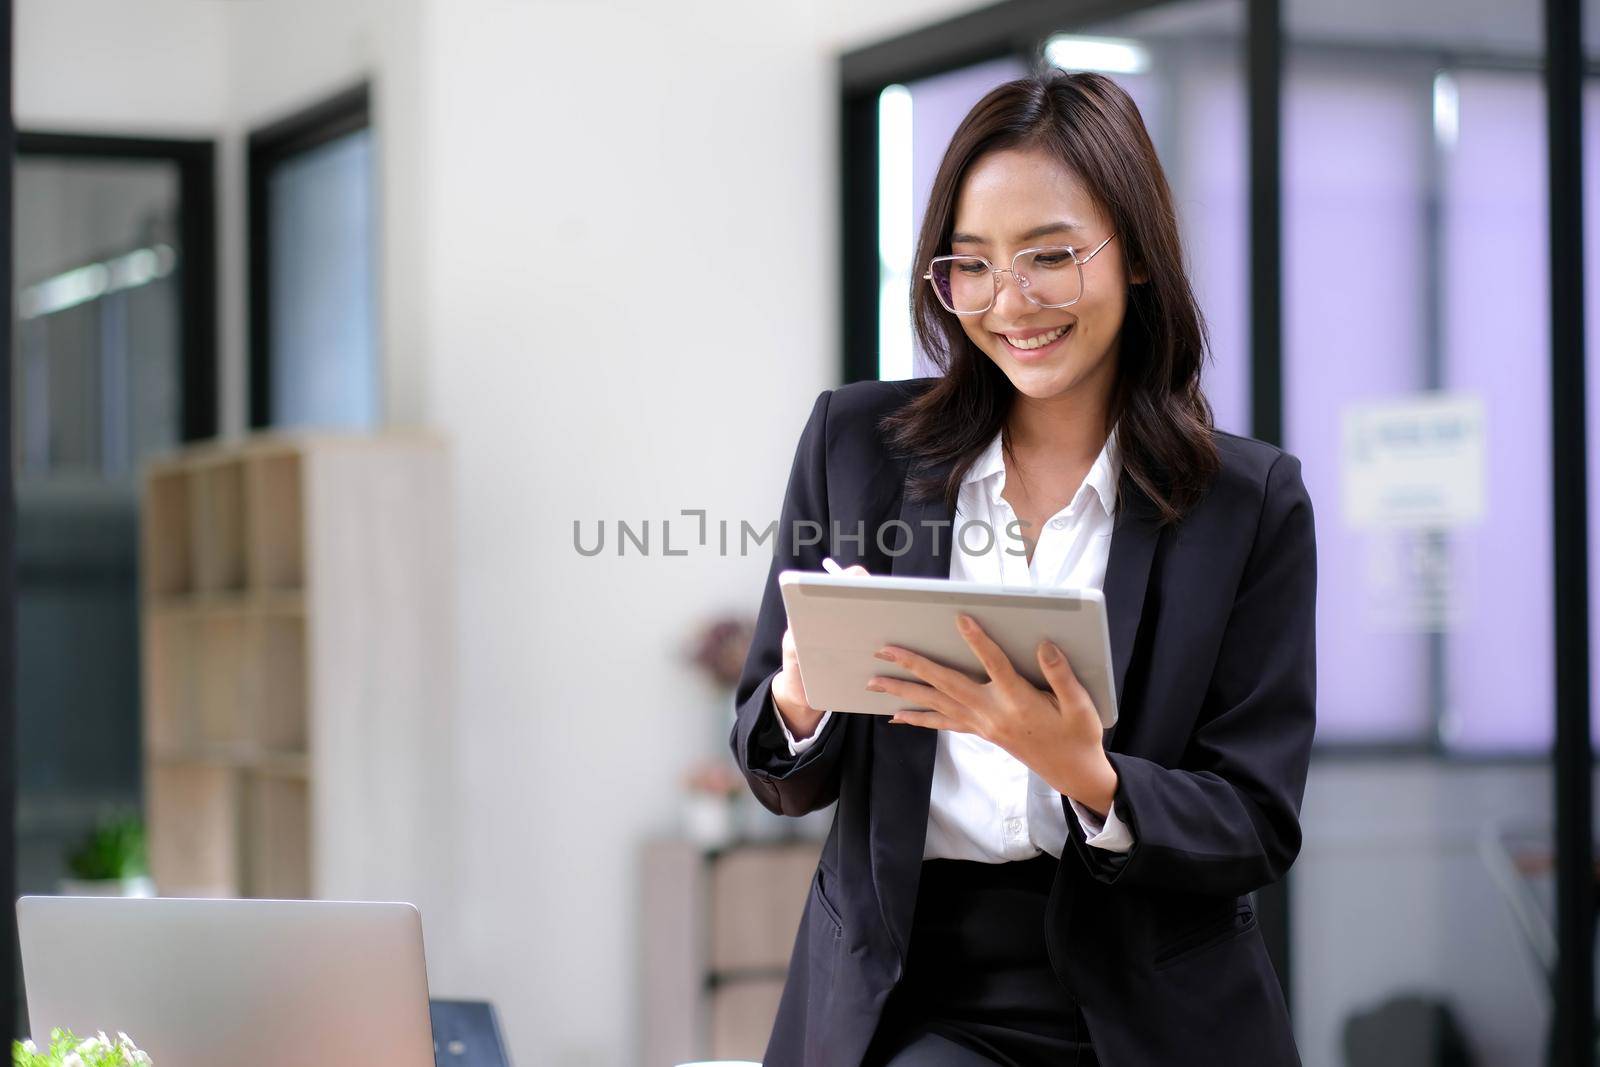 Beautiful businesswoman using stylus pen writing on tablet screen while standing in office room with copy space..